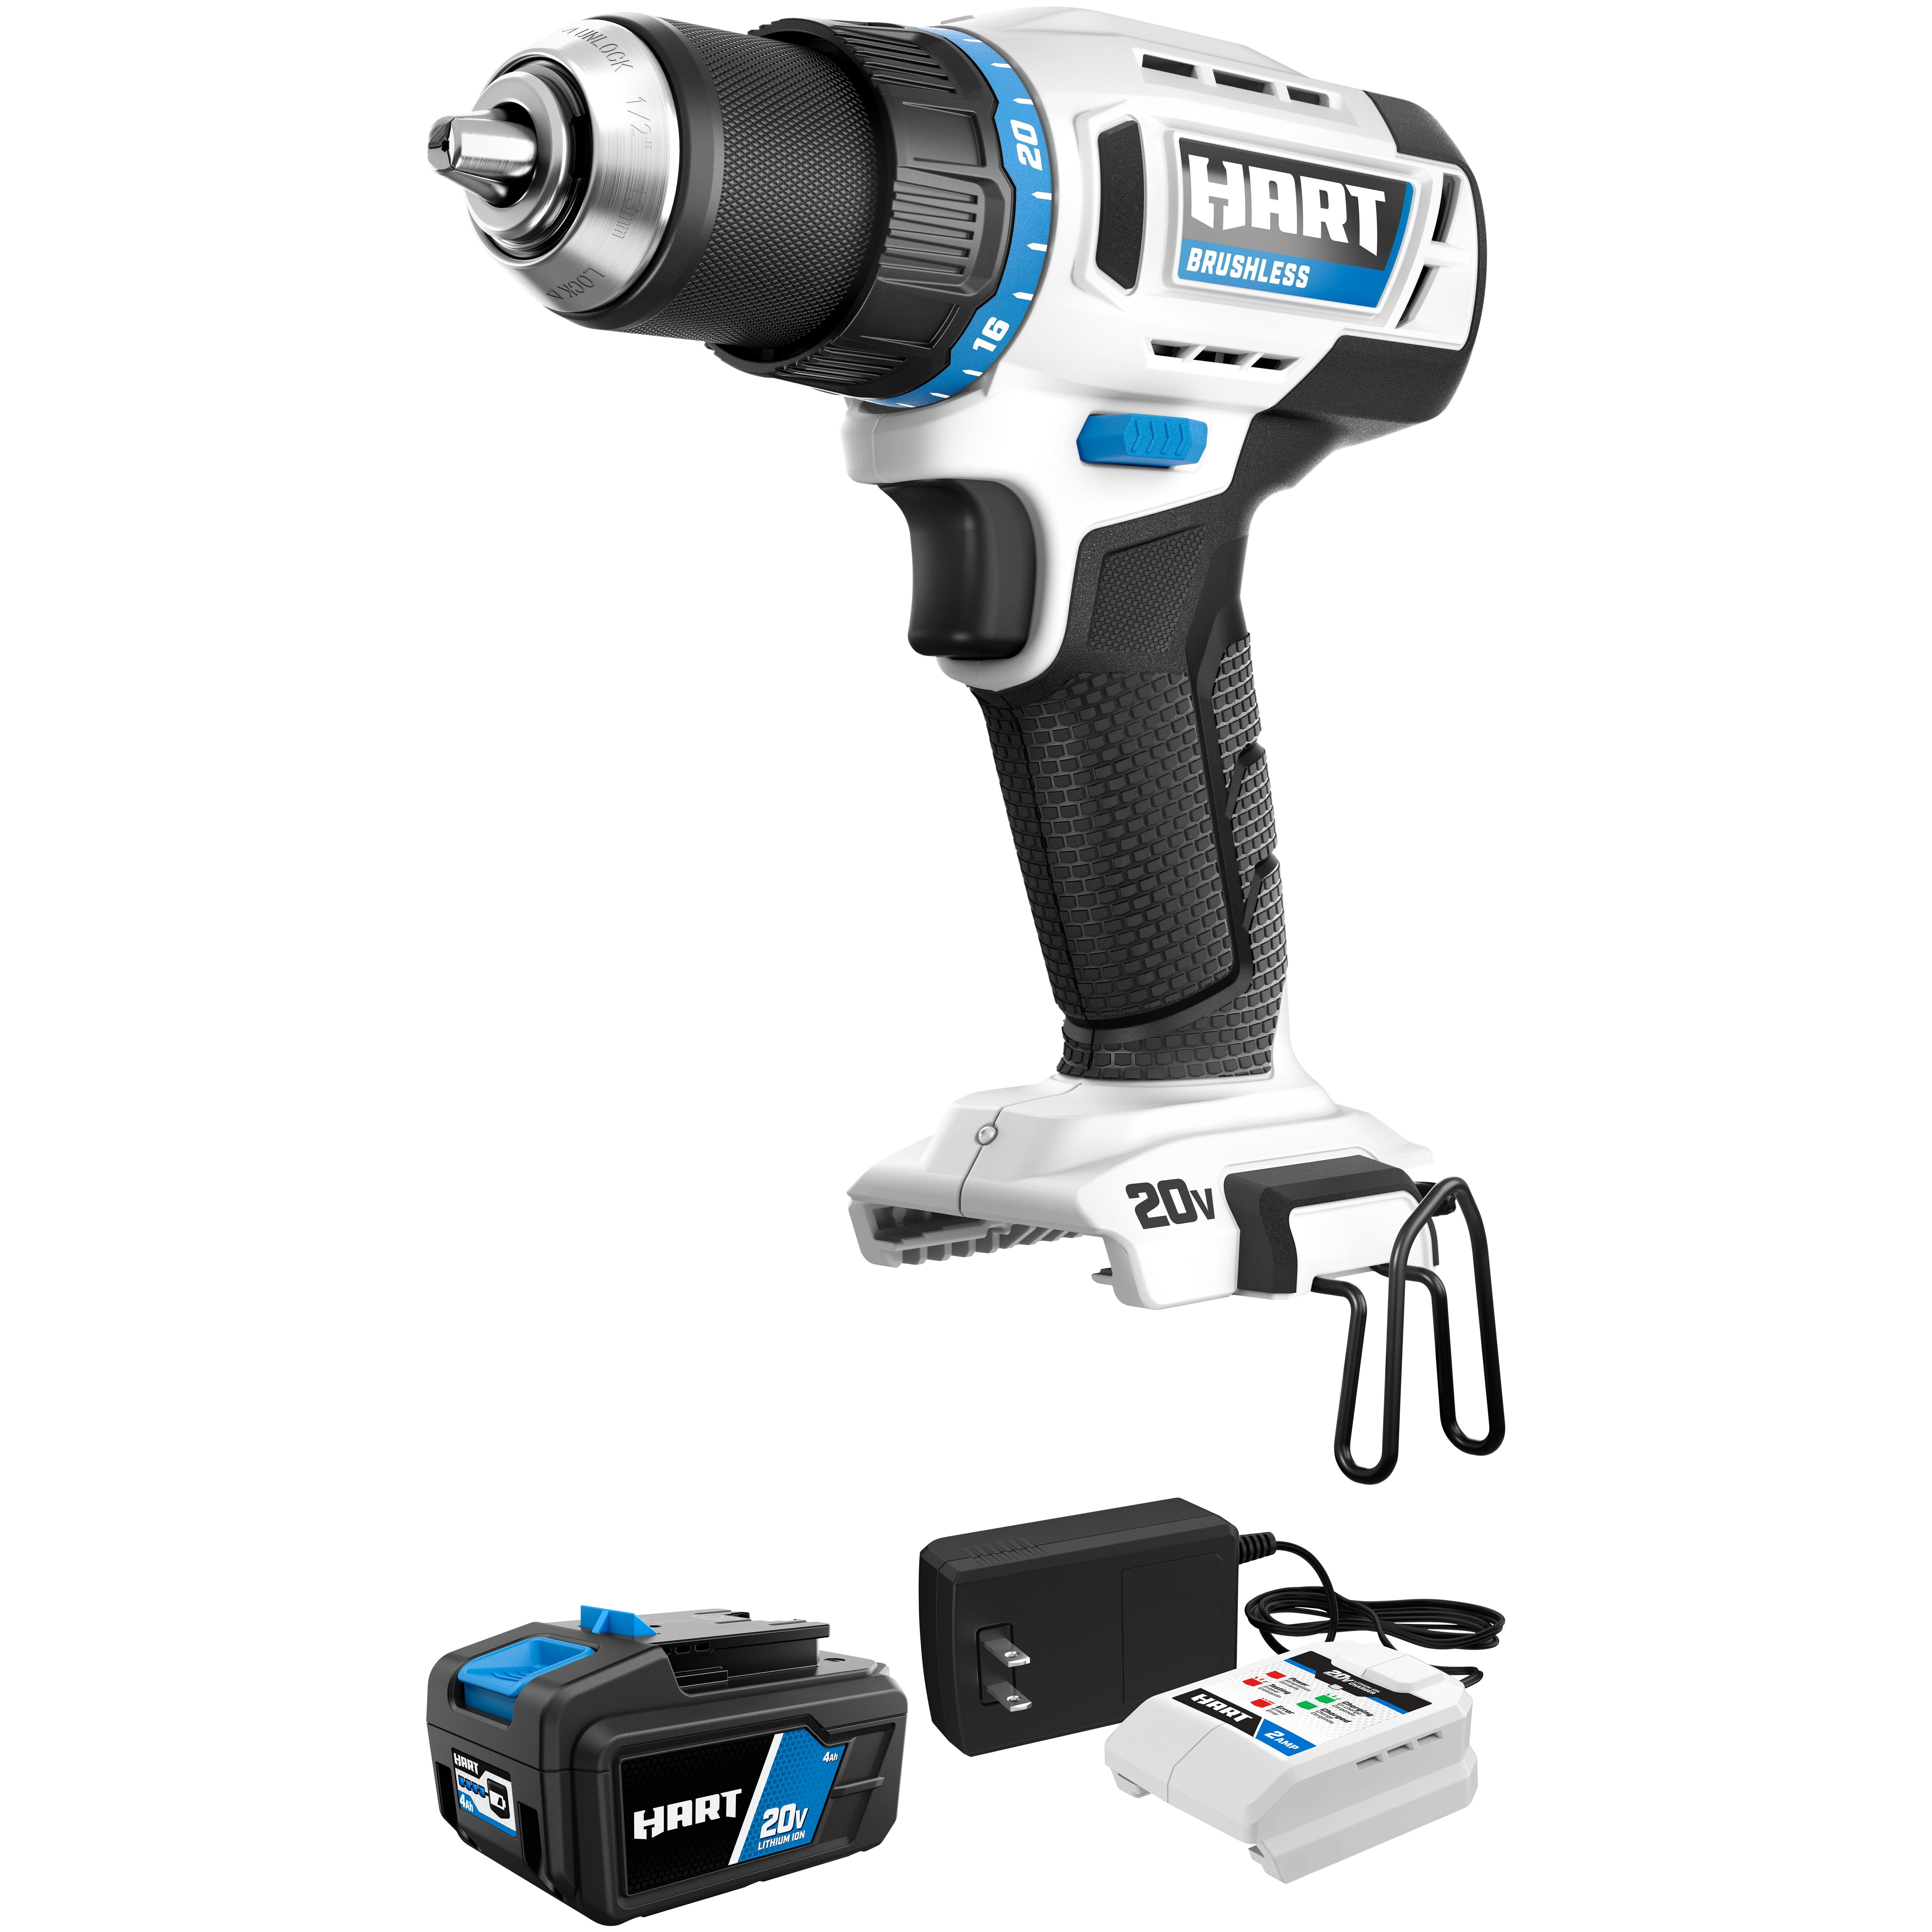 Senix 20 Volt MAX* 2-Tool Cordless Brushless Combo Kit, 1/2-Inch Hammer Drill Driver & 1/4-Inch Impact Driver (2 x Batteries and 1 x Charger Included)